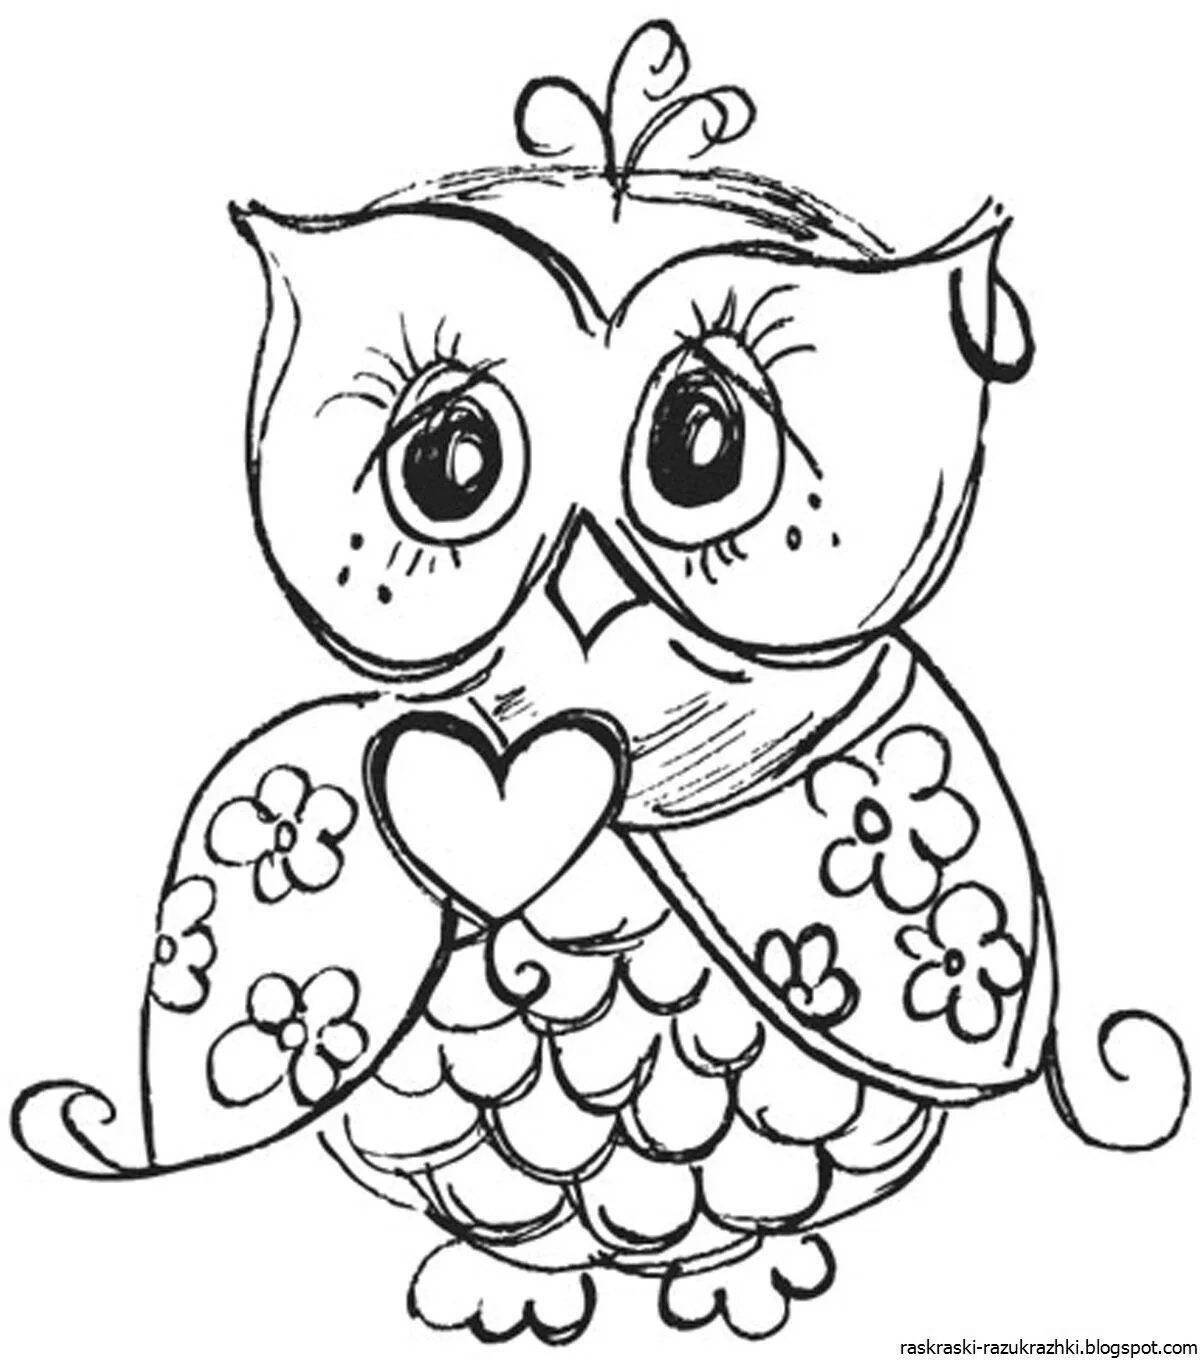 Creative owl coloring for girls